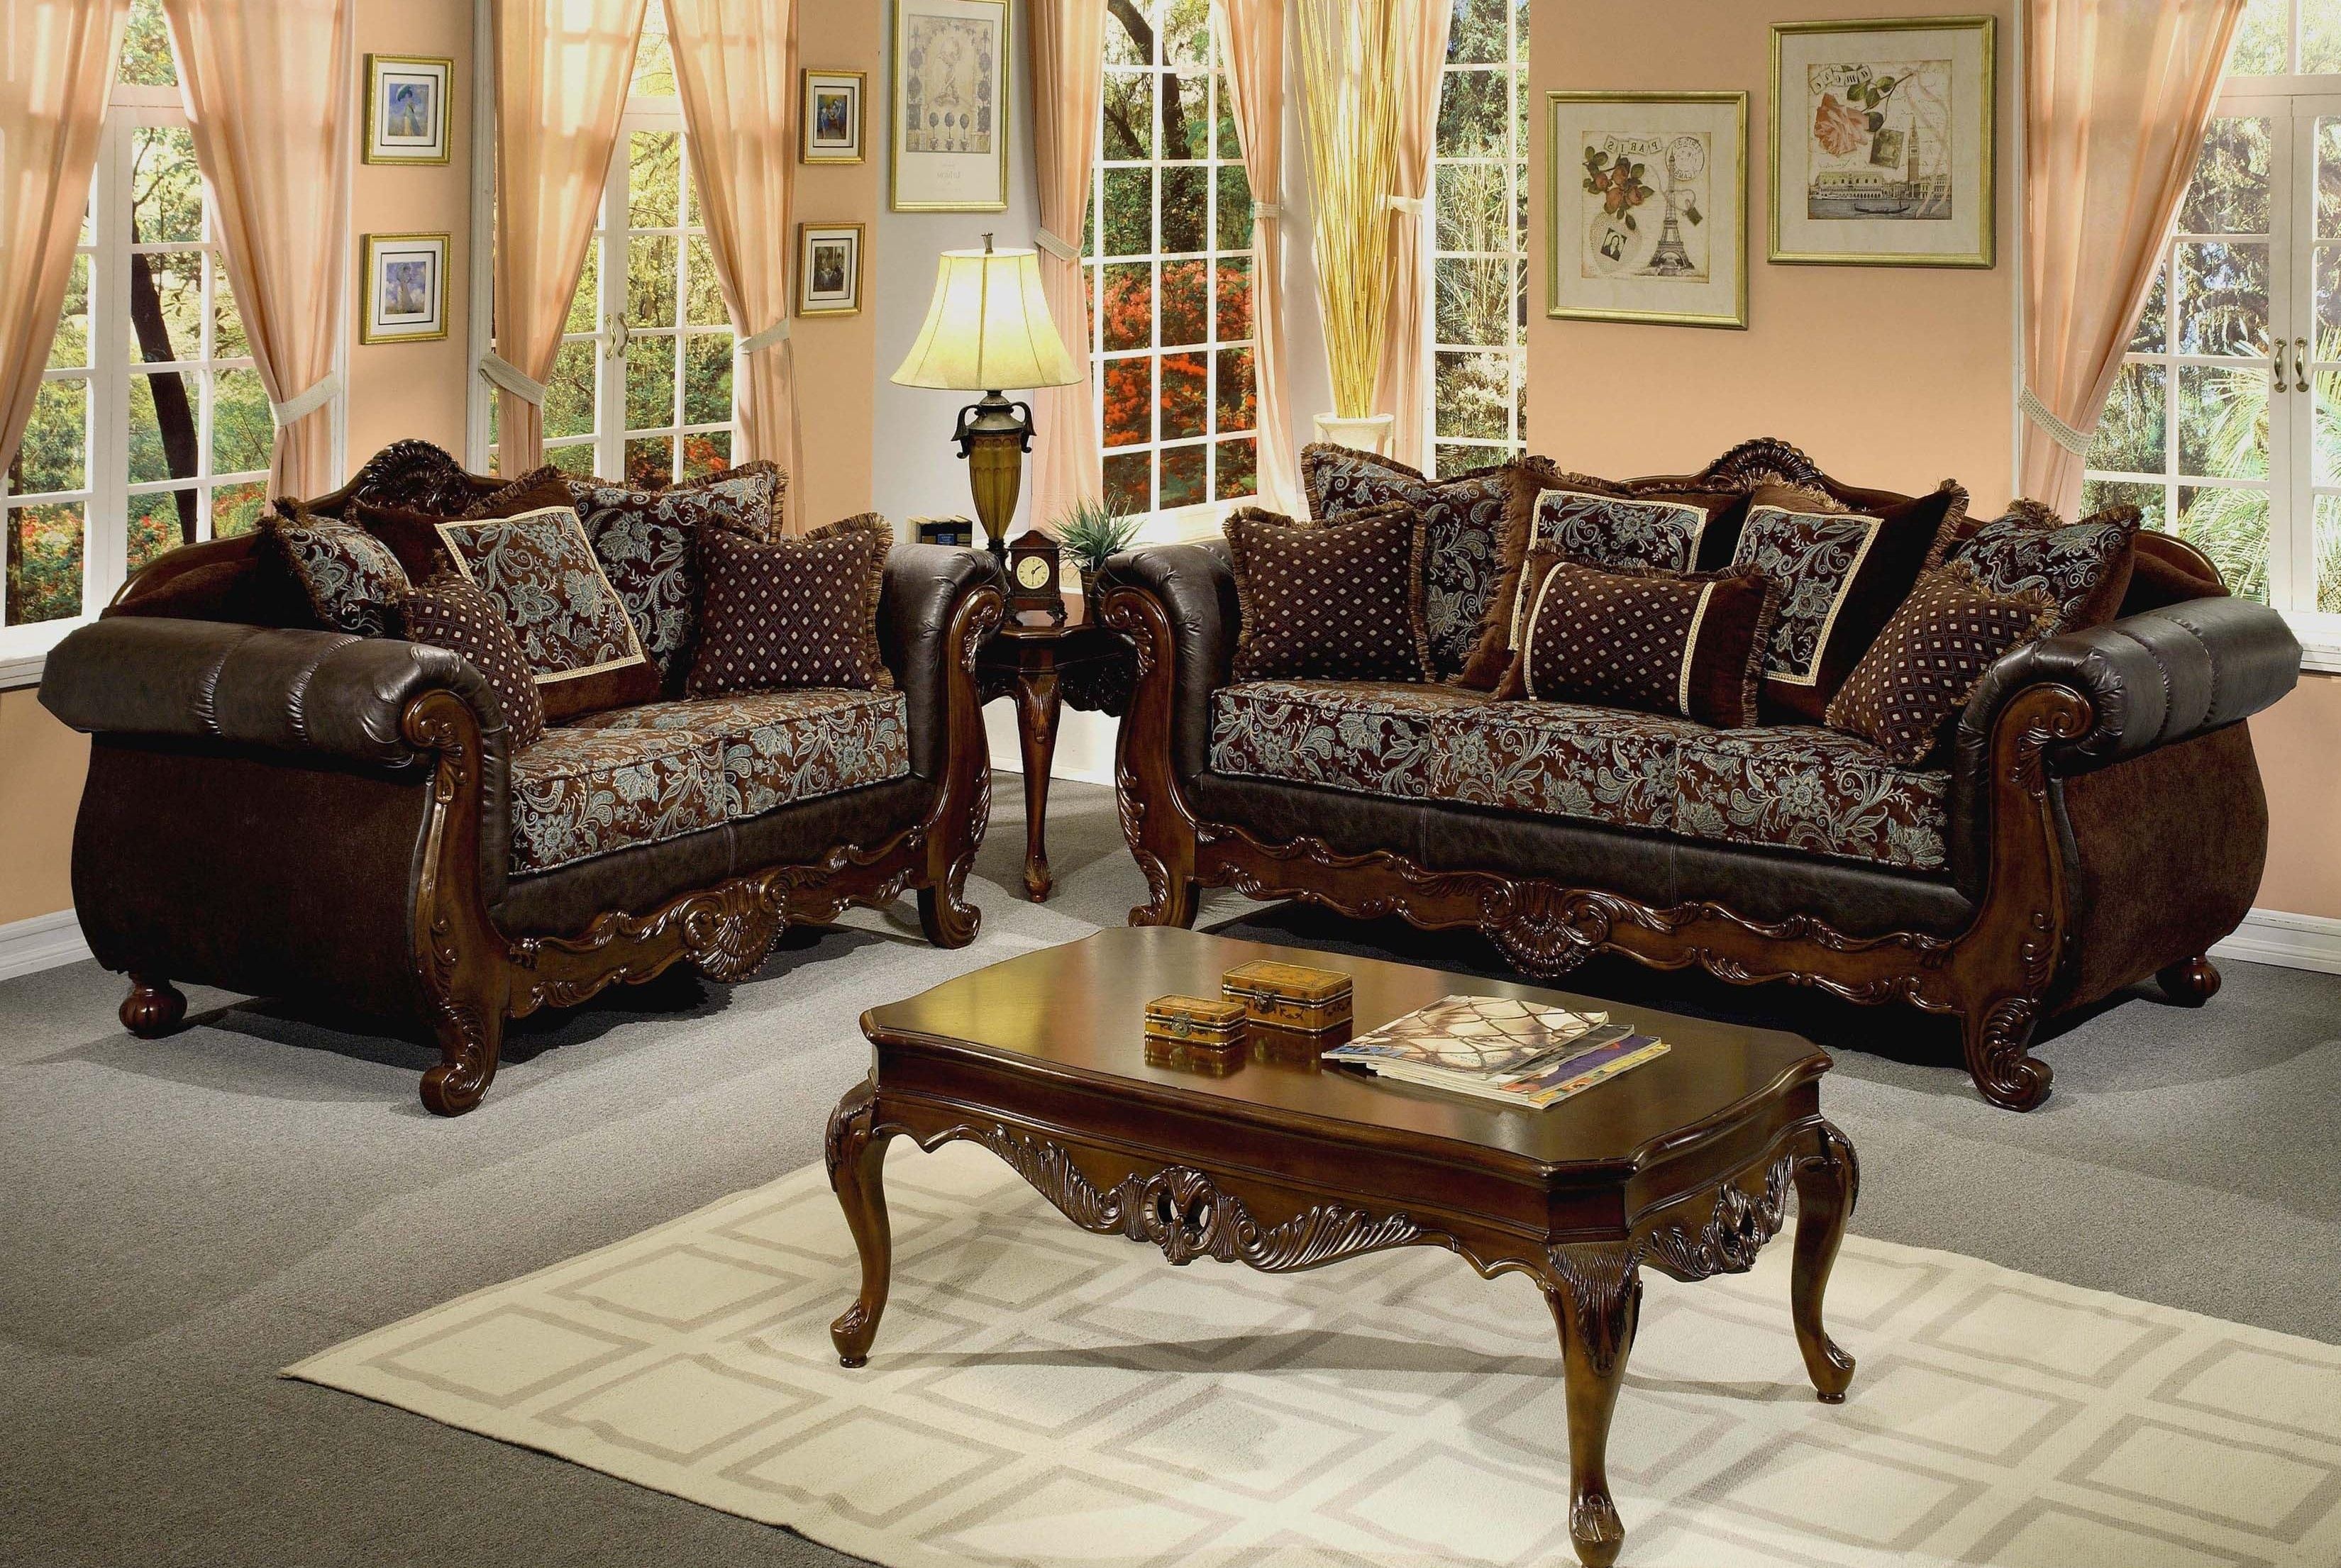 Big Lots Living Room Sets Trends With Simmons Sectional Sofa Best Throughout Big Lots Simmons Sectional Sofas (View 16 of 20)